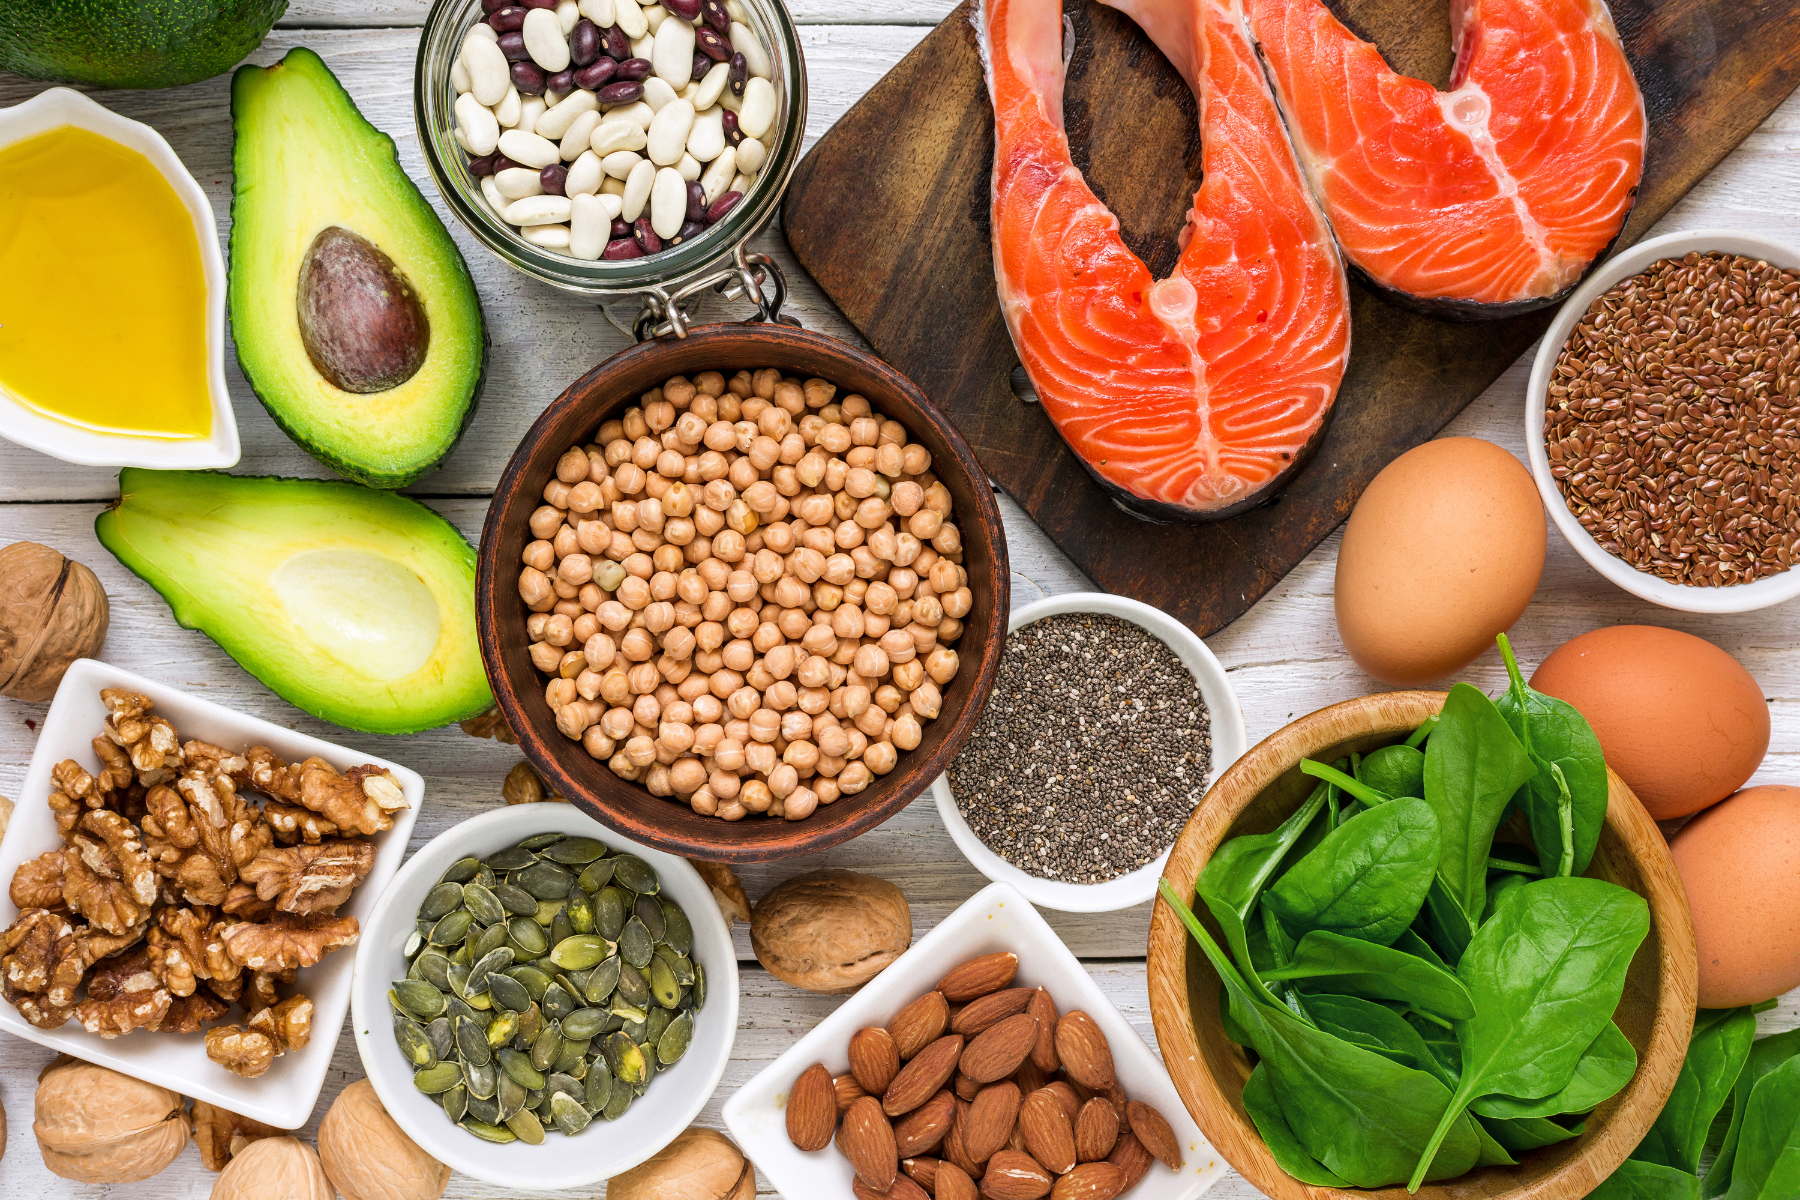 A table of high omega 3 foods that help relieve symptoms like peri menopause cramps.